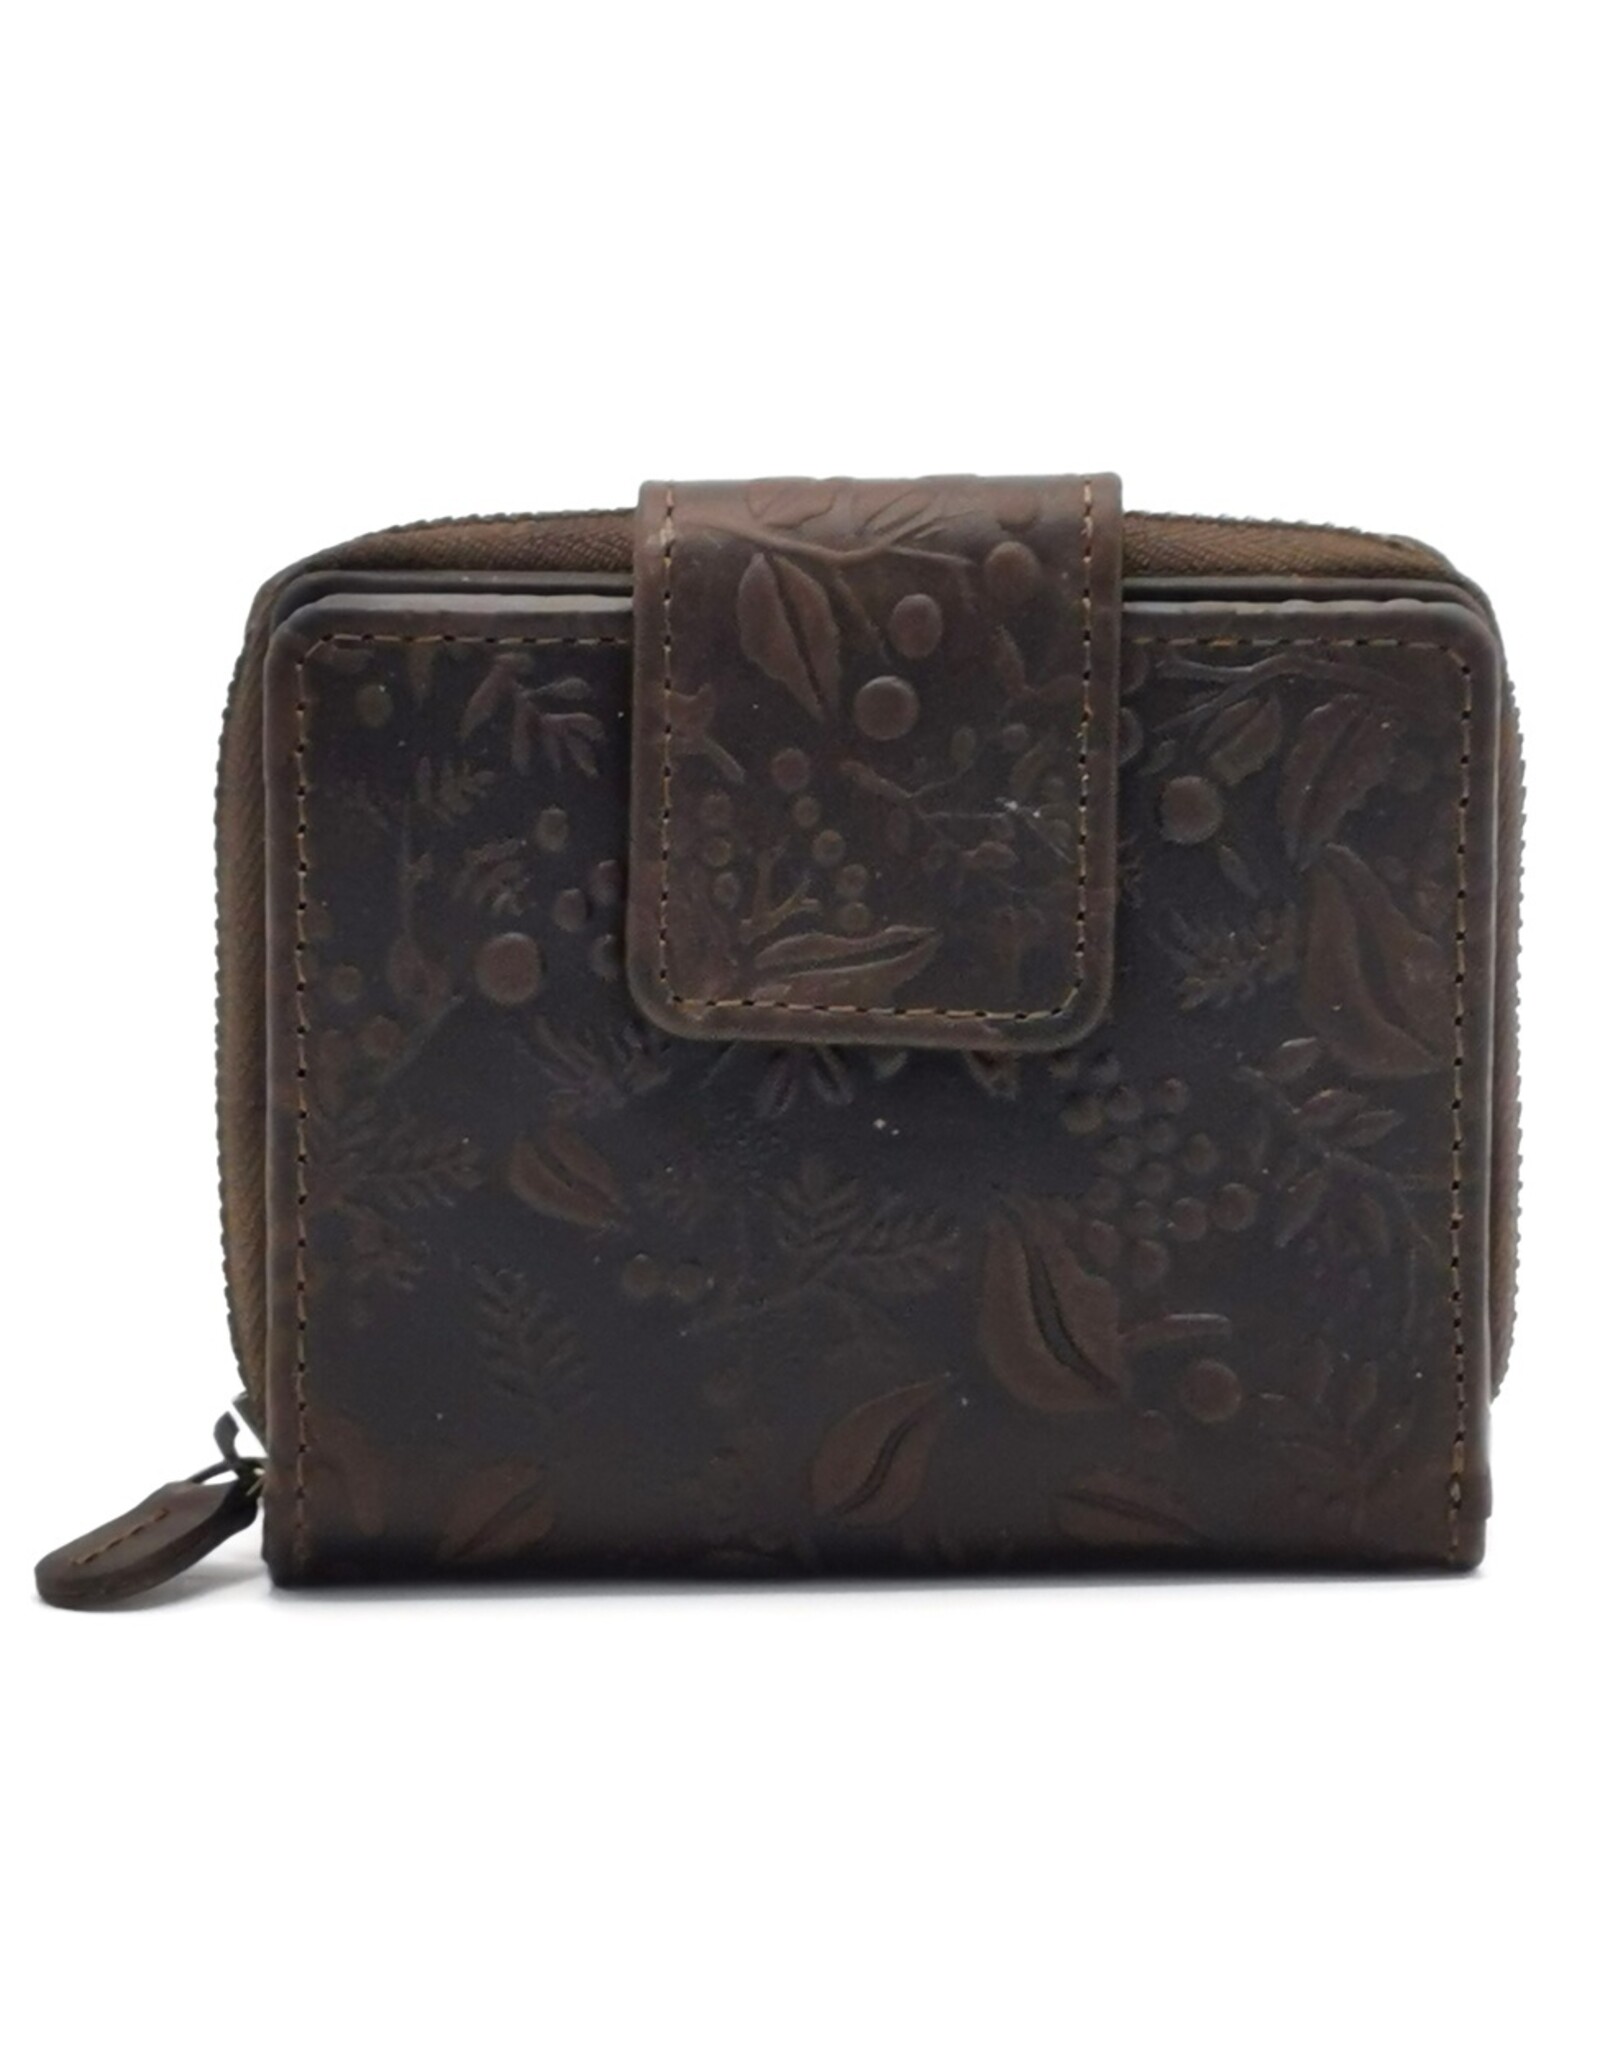 HillBurry Leather wallets - HillBurry Leather Wallet with Embossed Flowers Brown